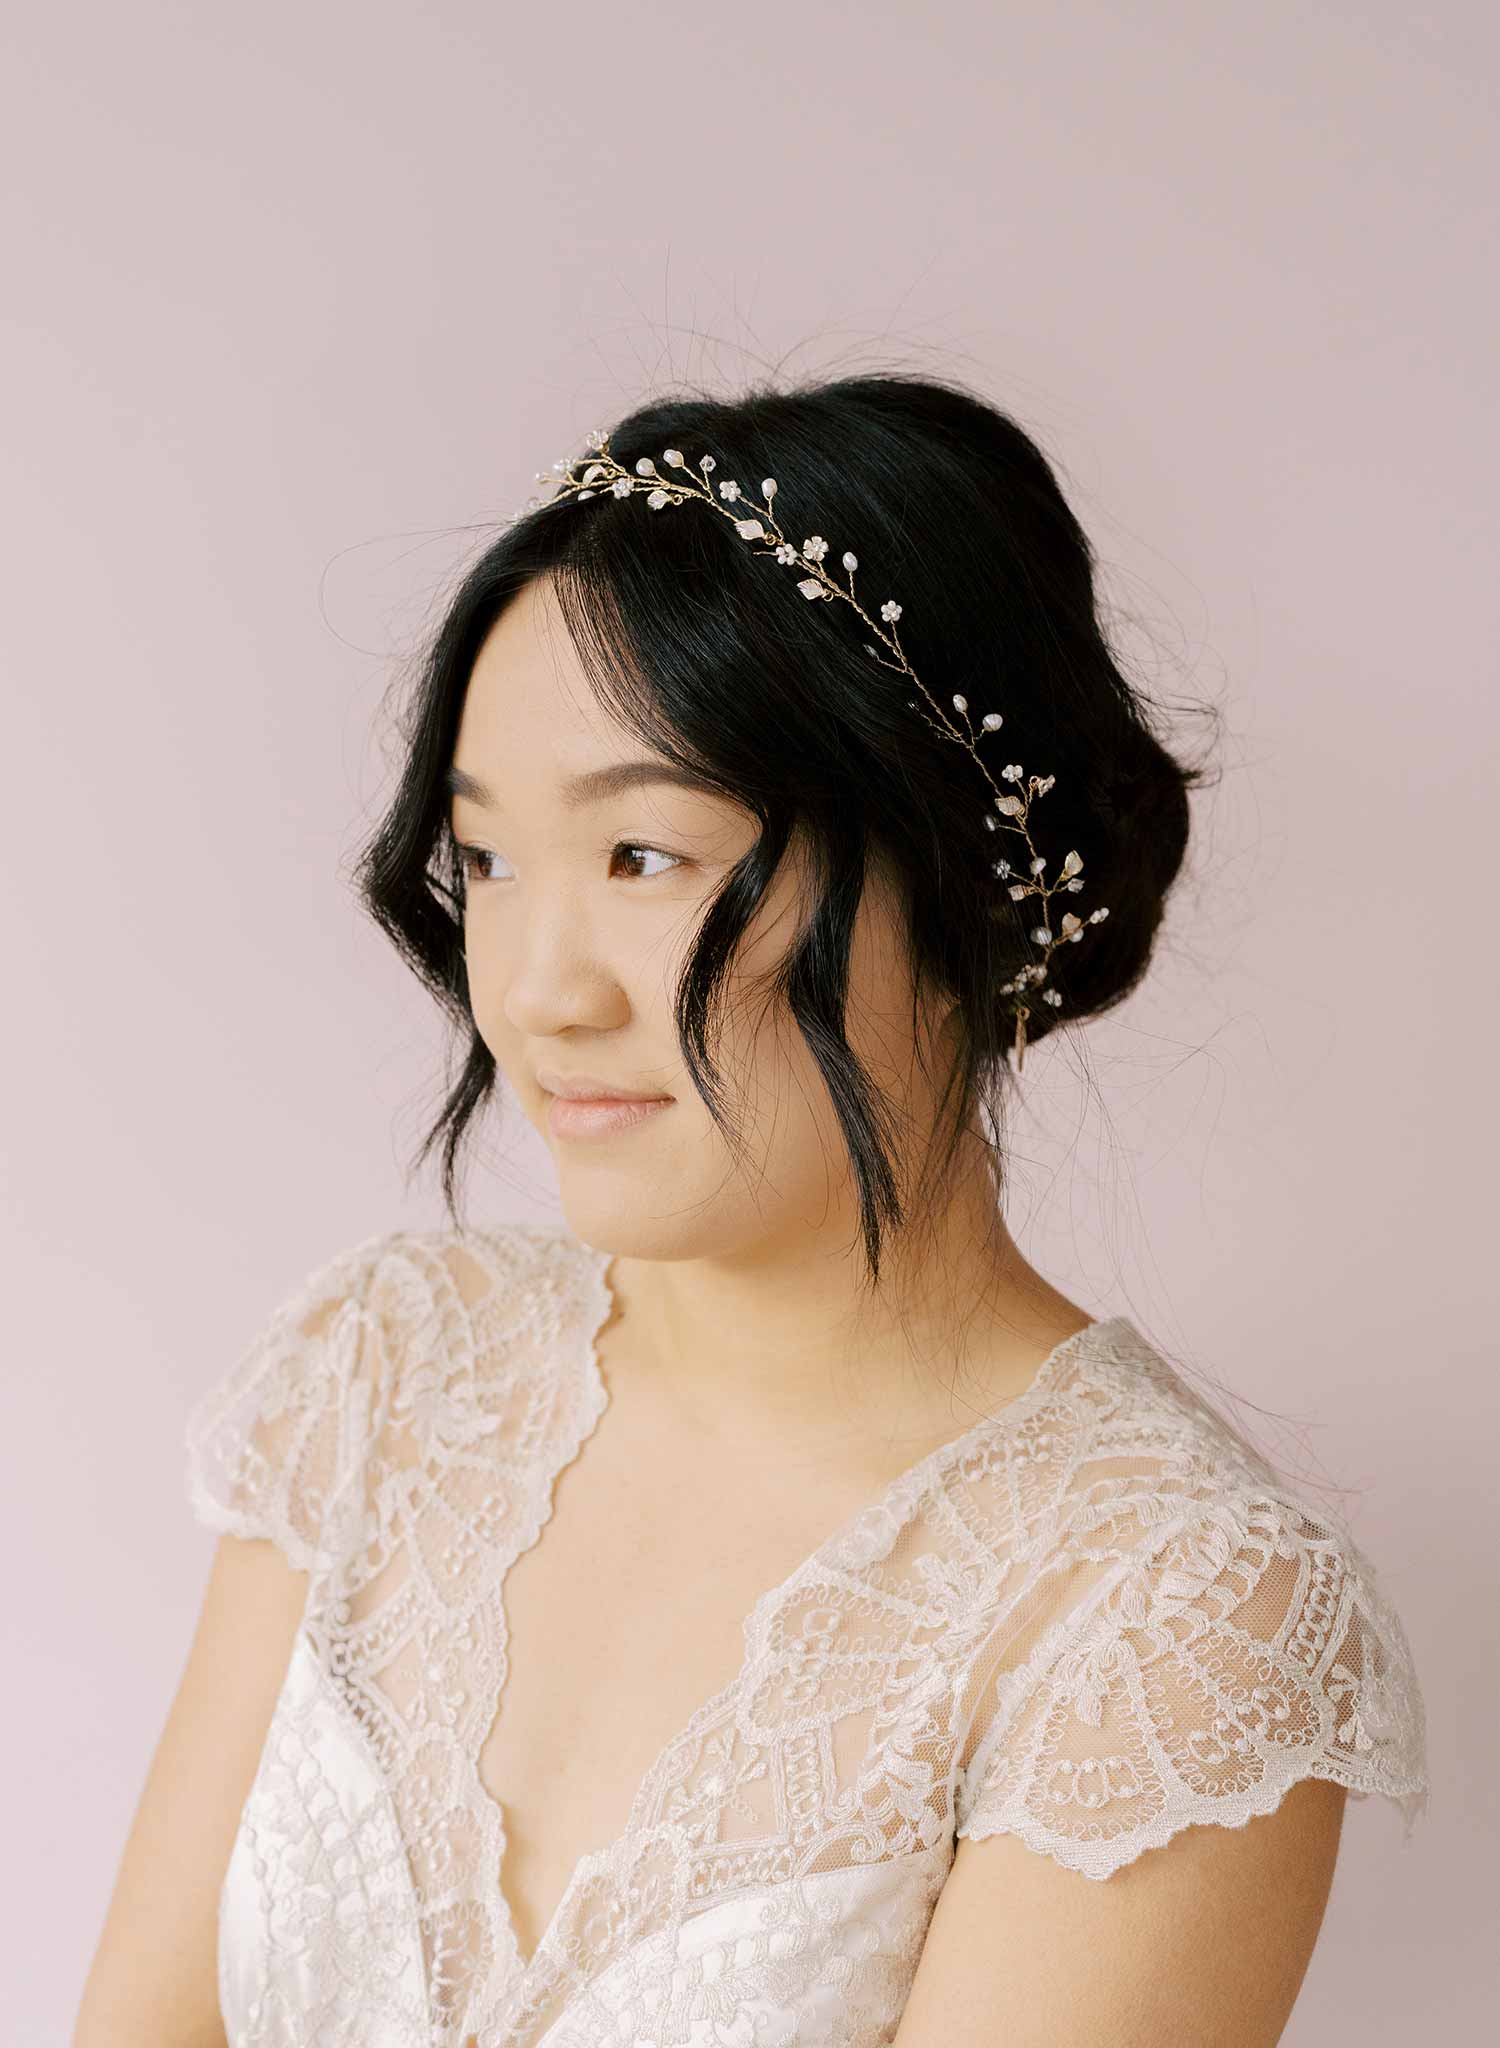 Sweet blossom and crystal hair vine - Style #2138